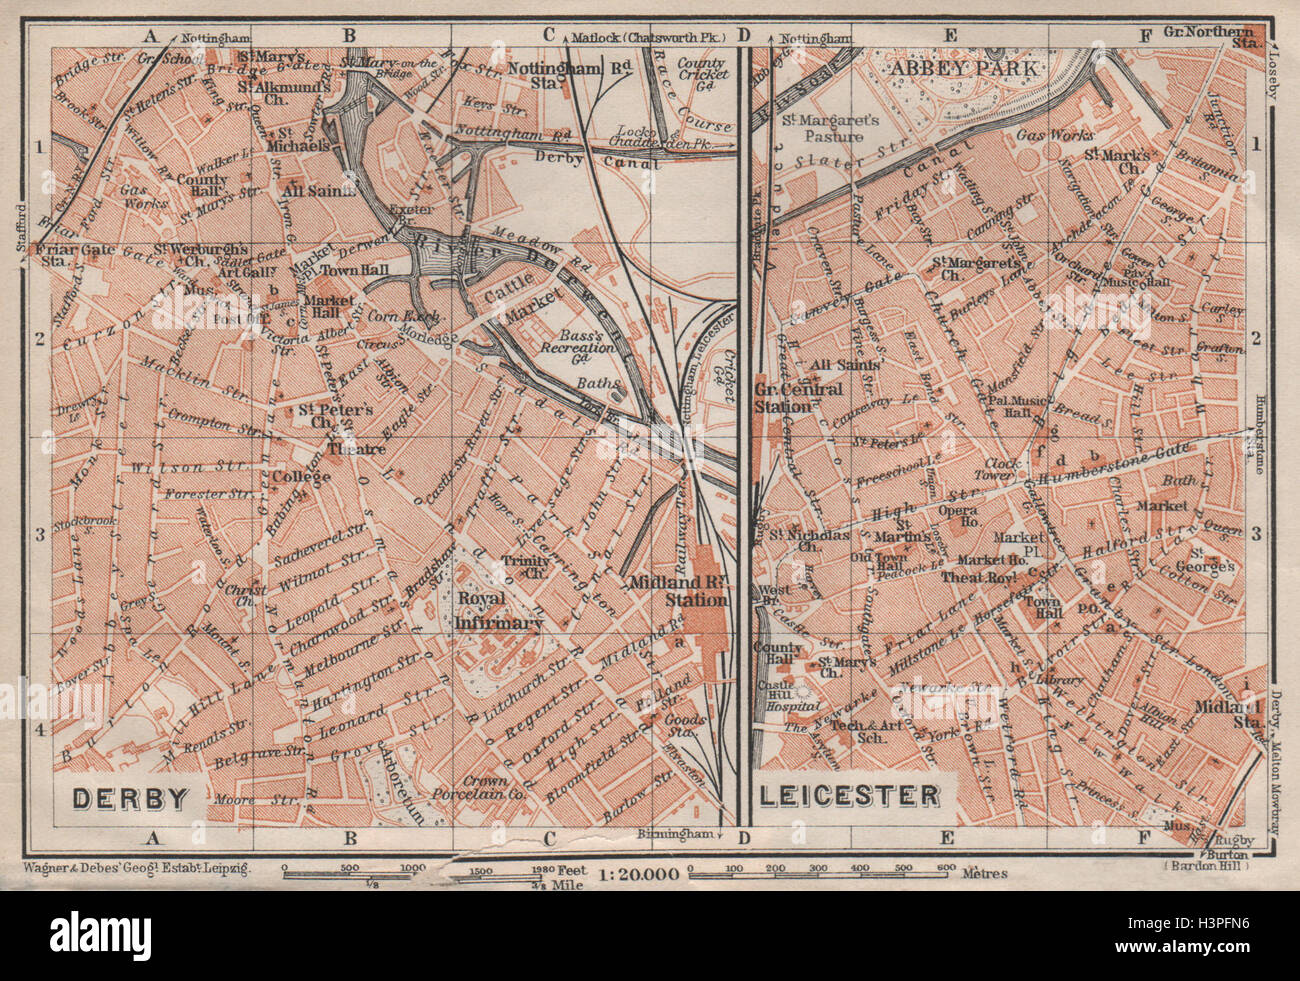 DERBY & LEICESTER antique town city plans. Midlands. BAEDEKER 1906 old map Stock Photo